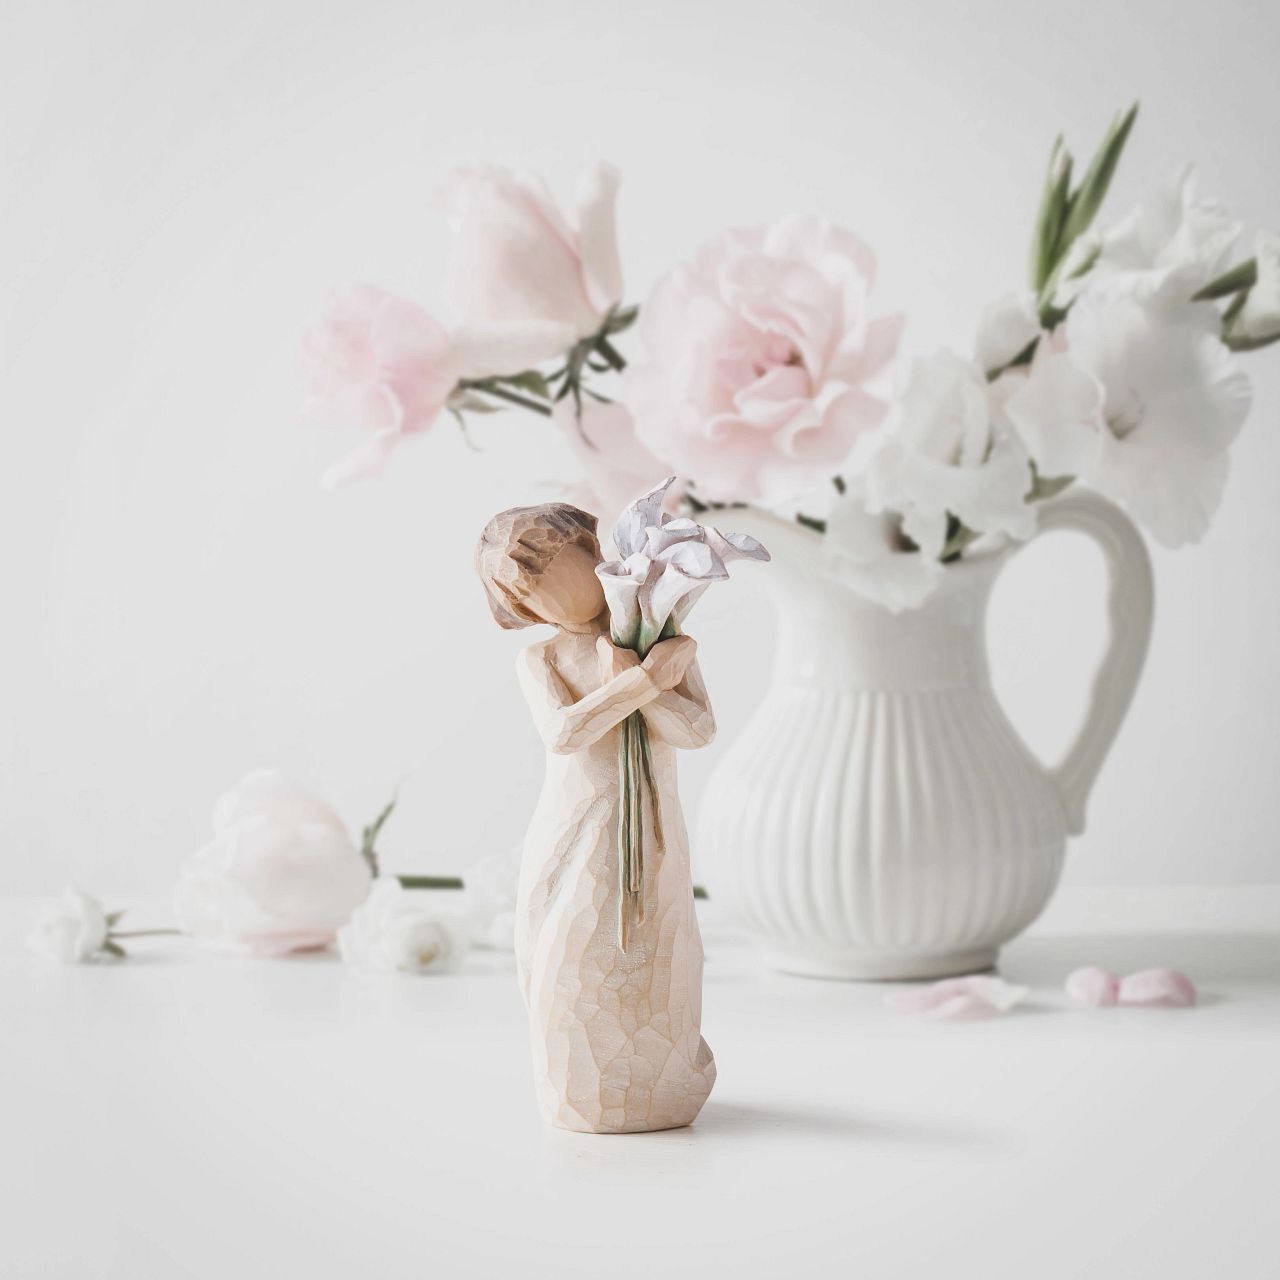 Willow Tree Beautiful Wishes  A gift that expresses love and caring...or for those who love flowers|. "Calla lilies are a symbol of majestic beauty. A universal sentiment for so many occasions...birth, marriage, anniversaries, in sympathy and in remembrance.